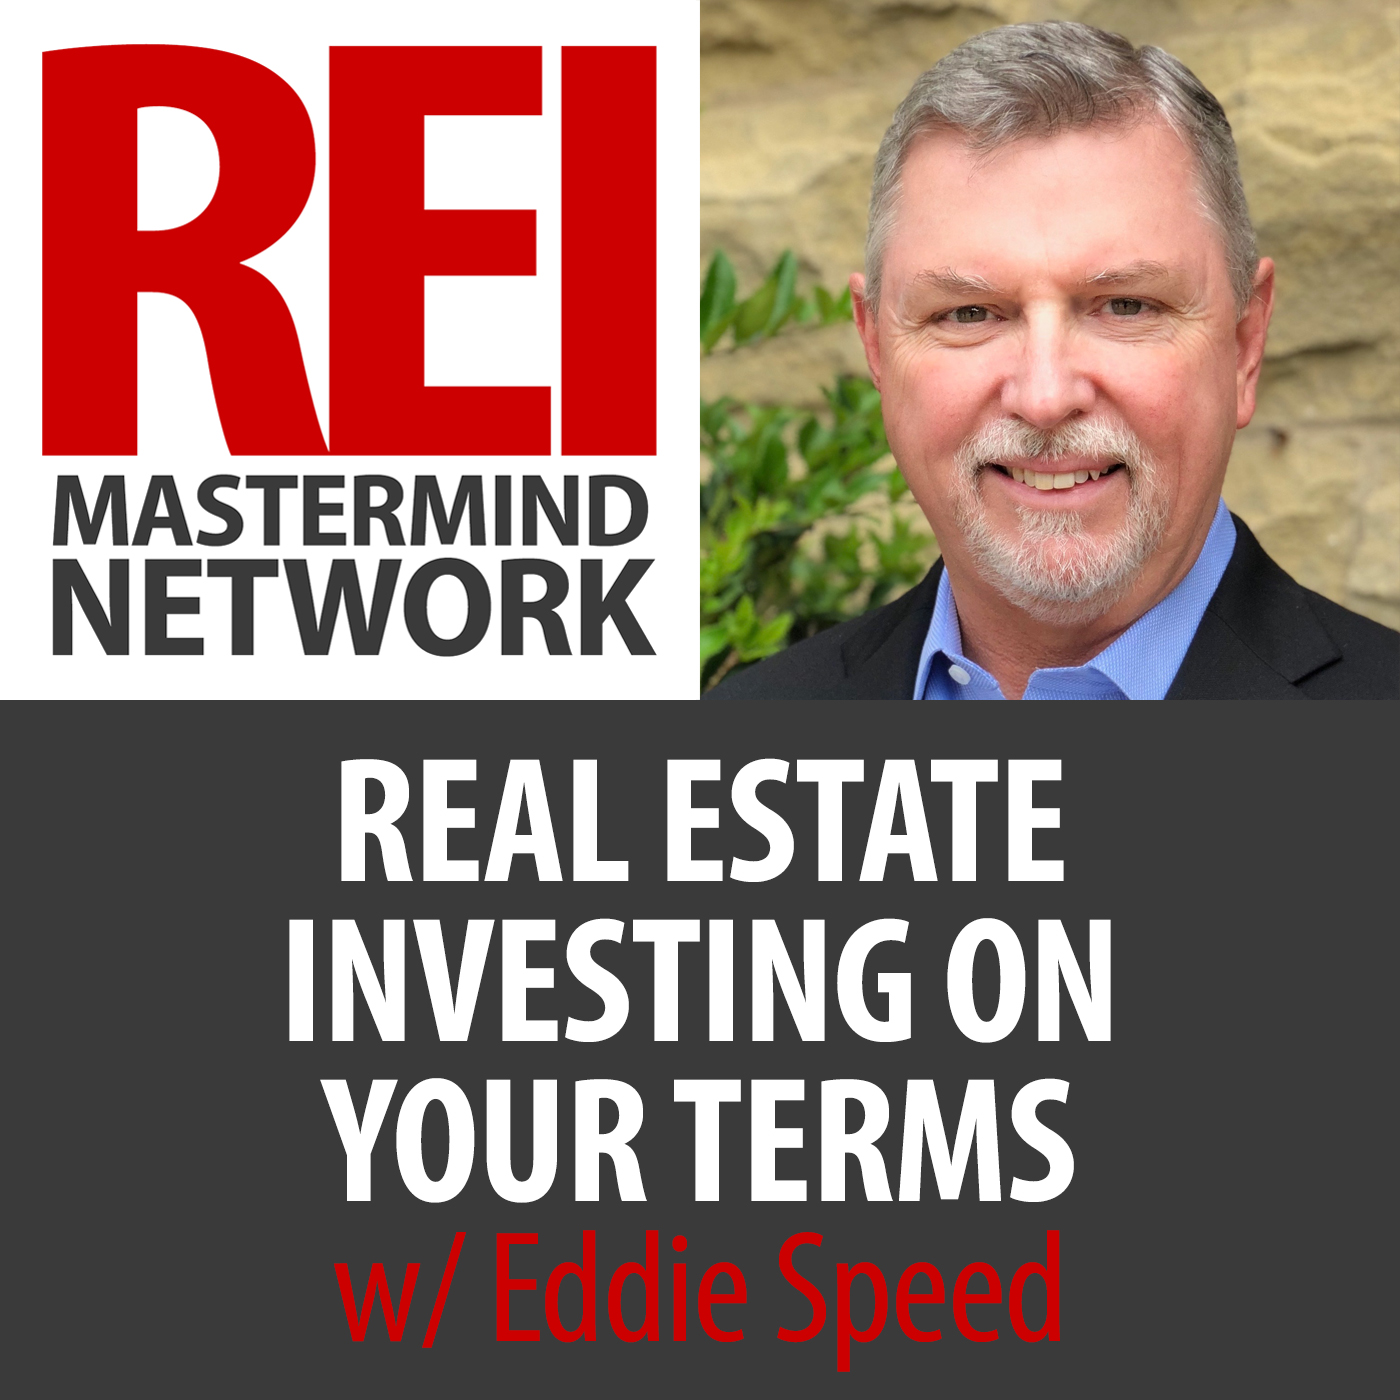 Real Estate Investing On Your Terms with Eddie Speed #222